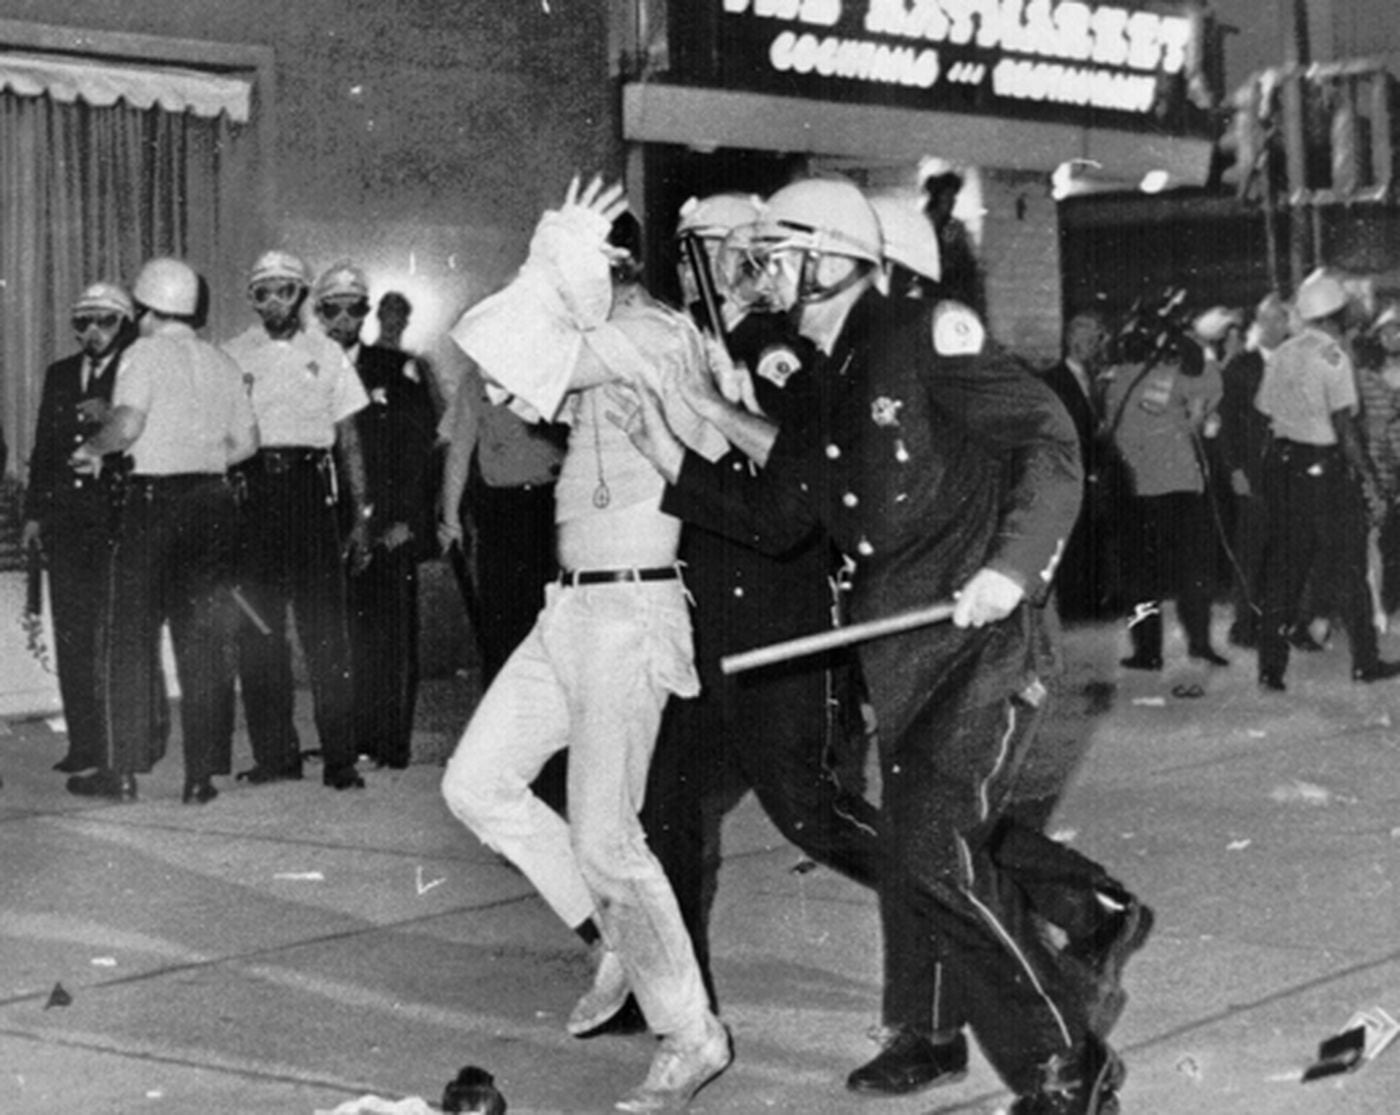 Protester is arrested in Chicago during the tumultuous Democratic National Convention in August 1968, when police and National Guard troops scrapped with demonstrators.